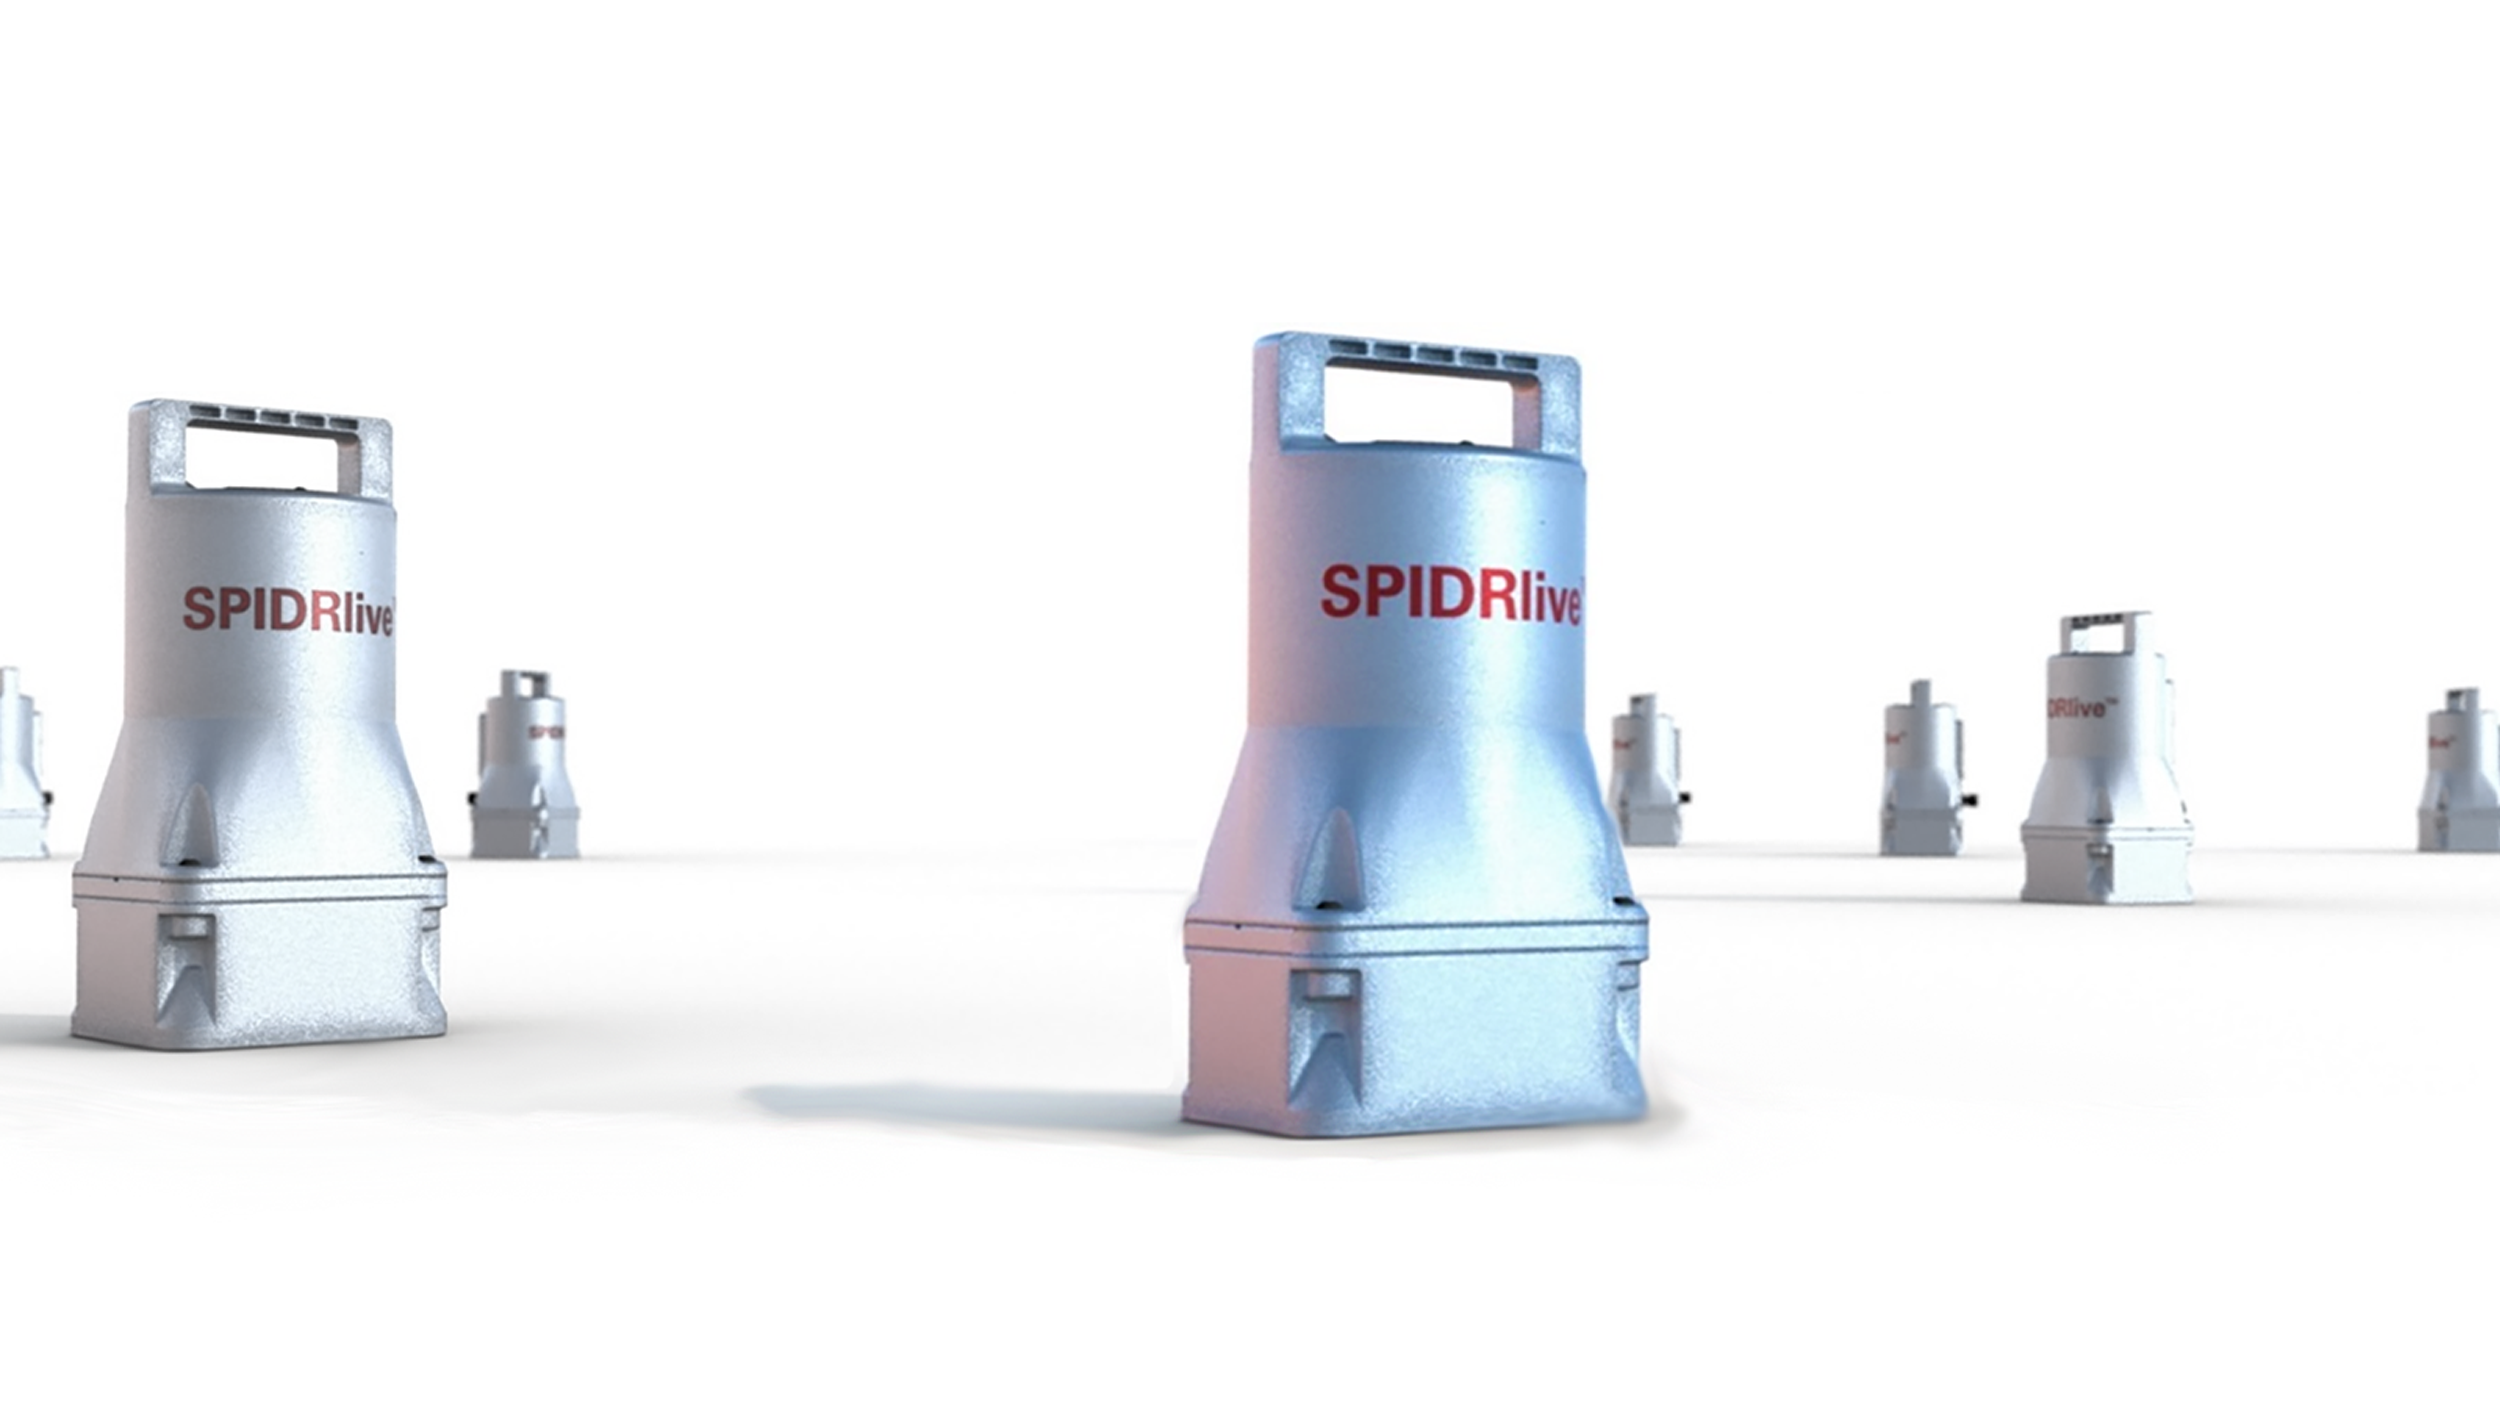 SPIDRlive® captures and streams high-quality wellhead pressure data